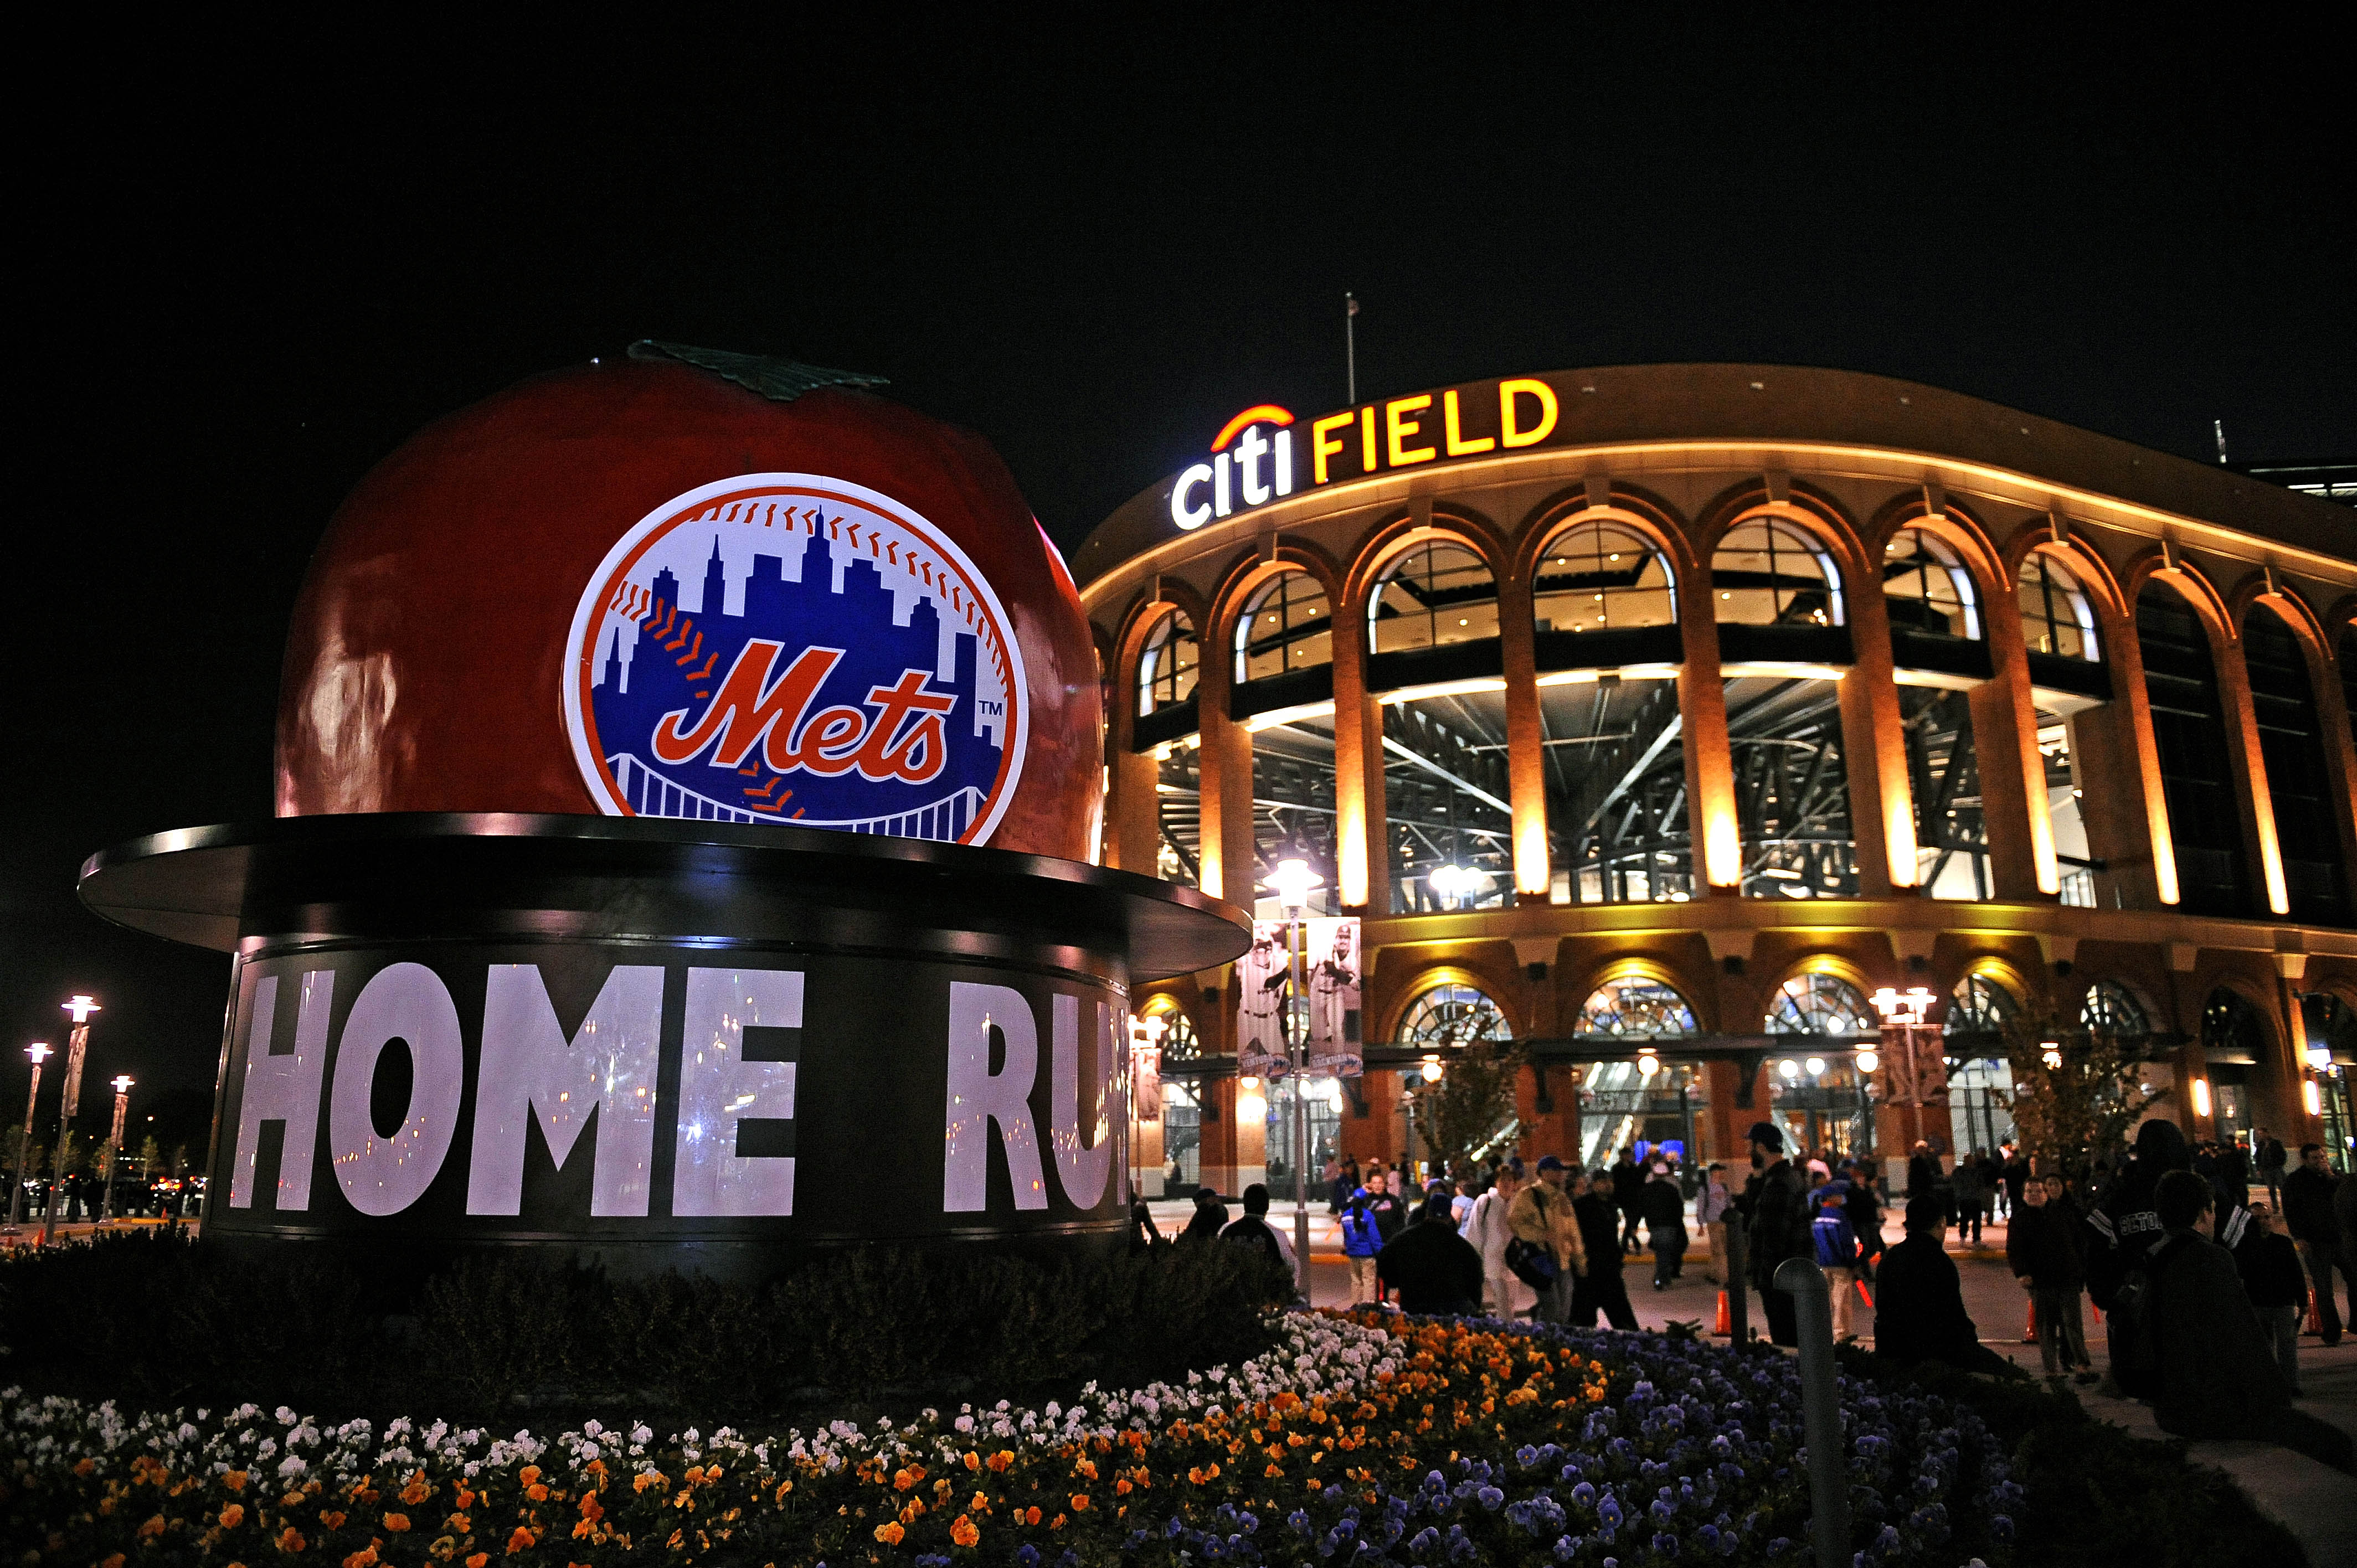 Free download Nice New York Mets wallpaper New York Mets wallpaper [4256x2832] for your Desktop, Mobile & Tablet. Explore Free NY Mets Desktop Wallpaper. NY Mets Image and Wallpaper